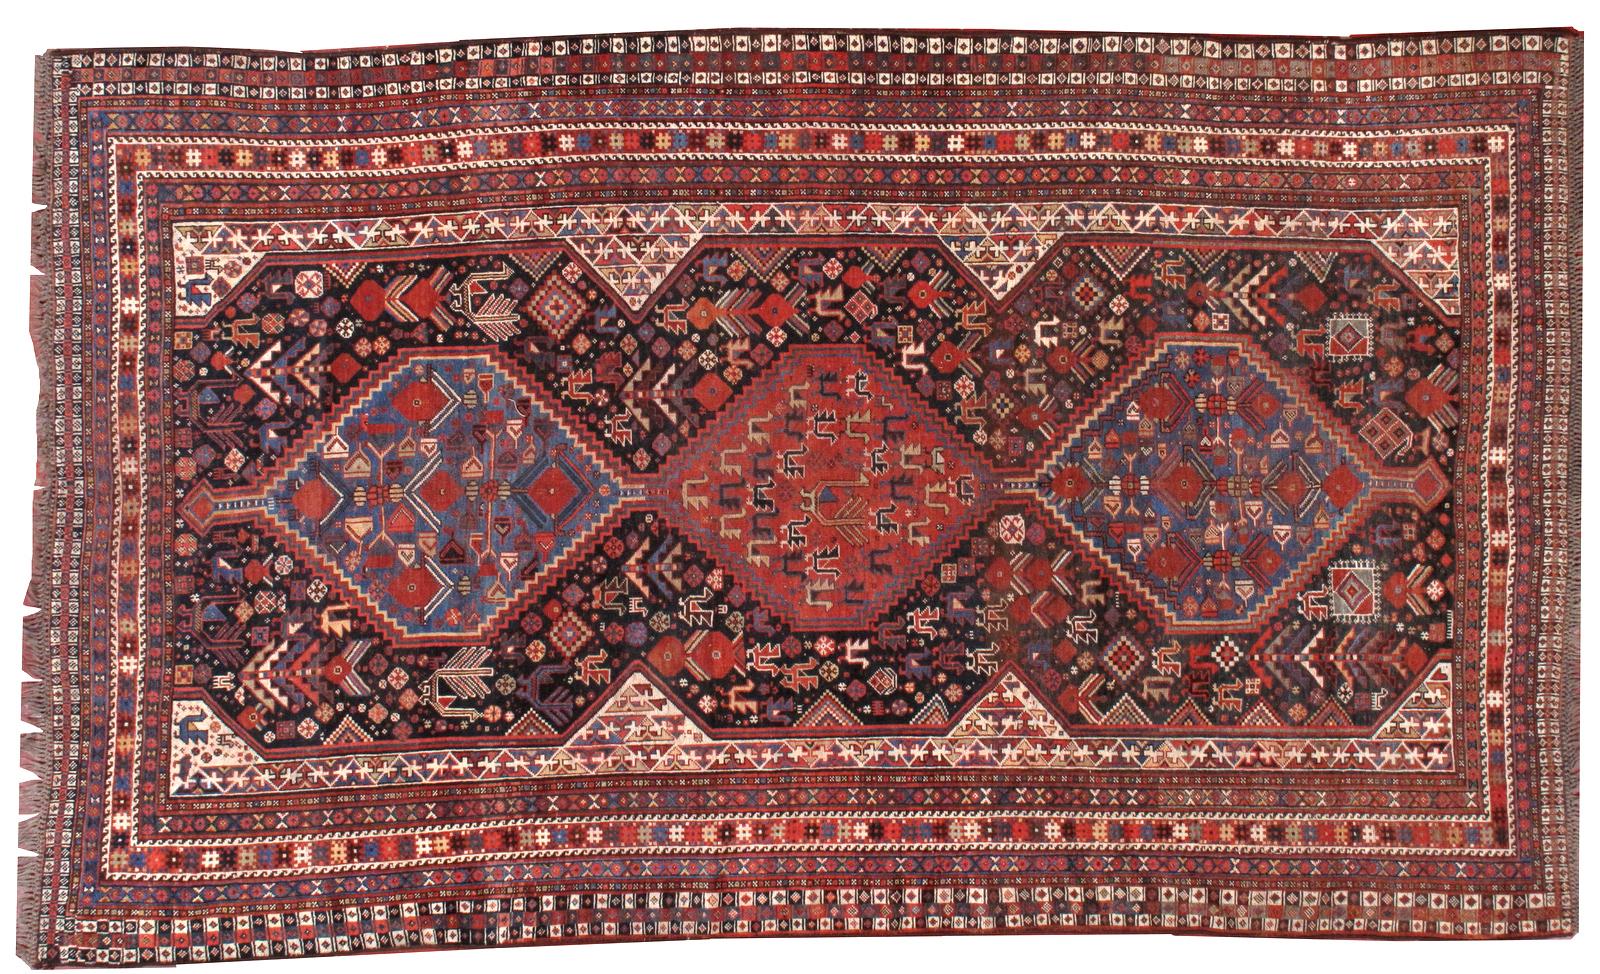 Khamseh carpet, late 19th century, three medium blue and red contiguous stepped hexagons on a navy blue/red field displaying polychrome stylized birds, 